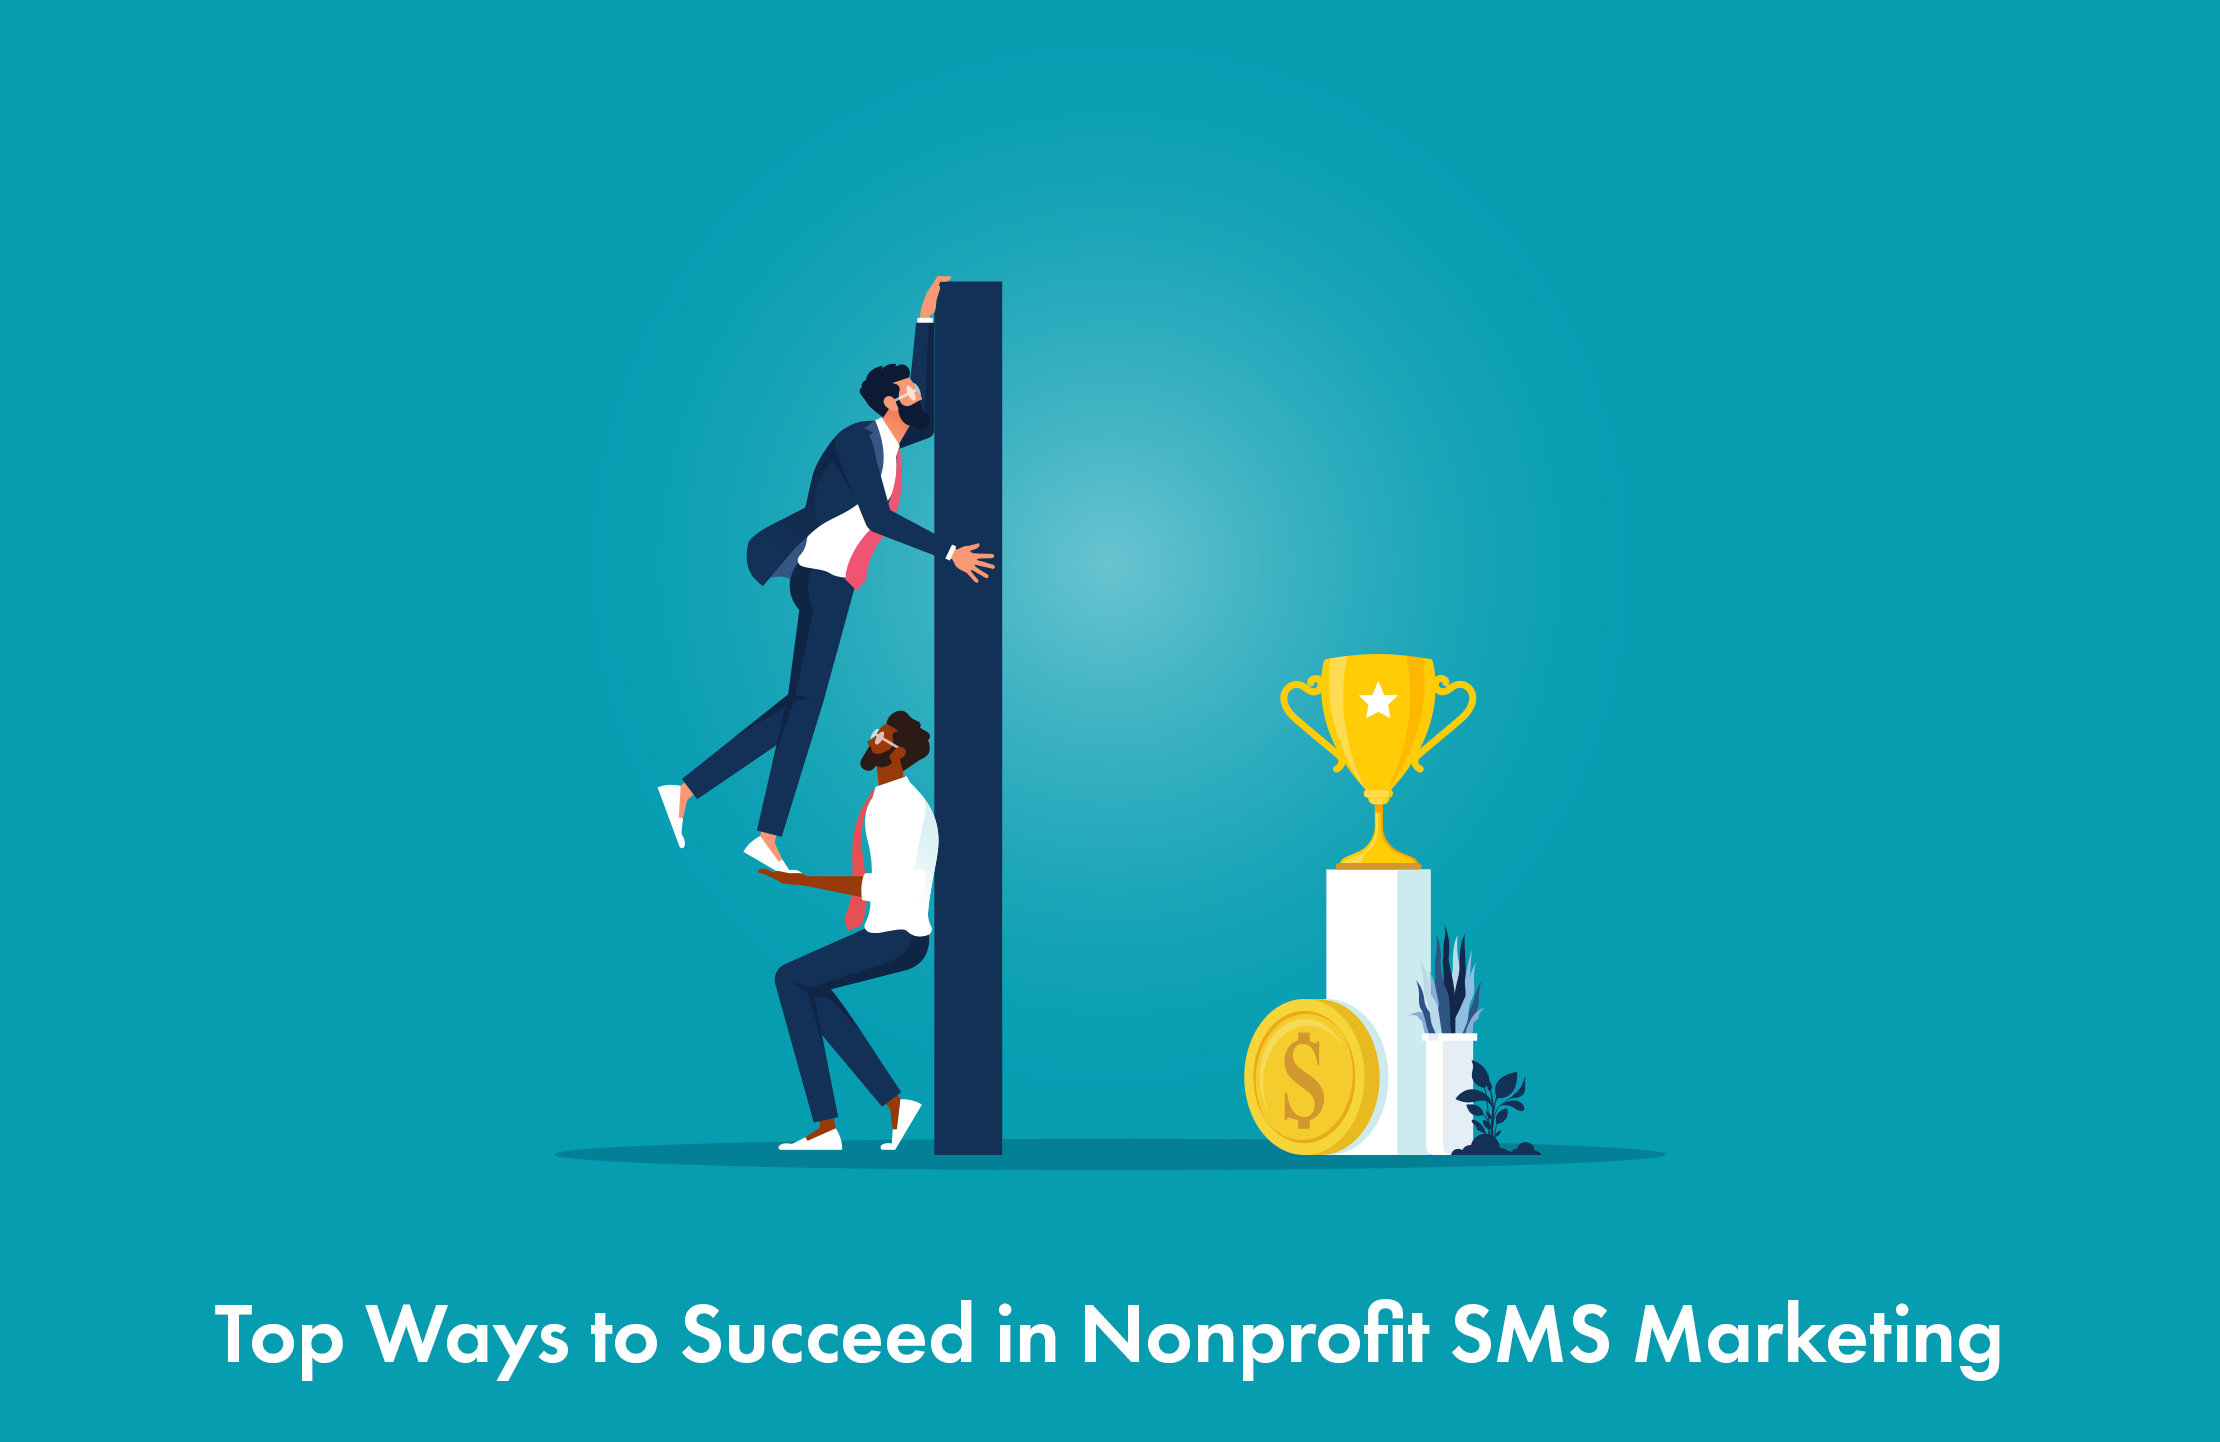 Top Ways to Succeed in Nonprofit SMS Marketing